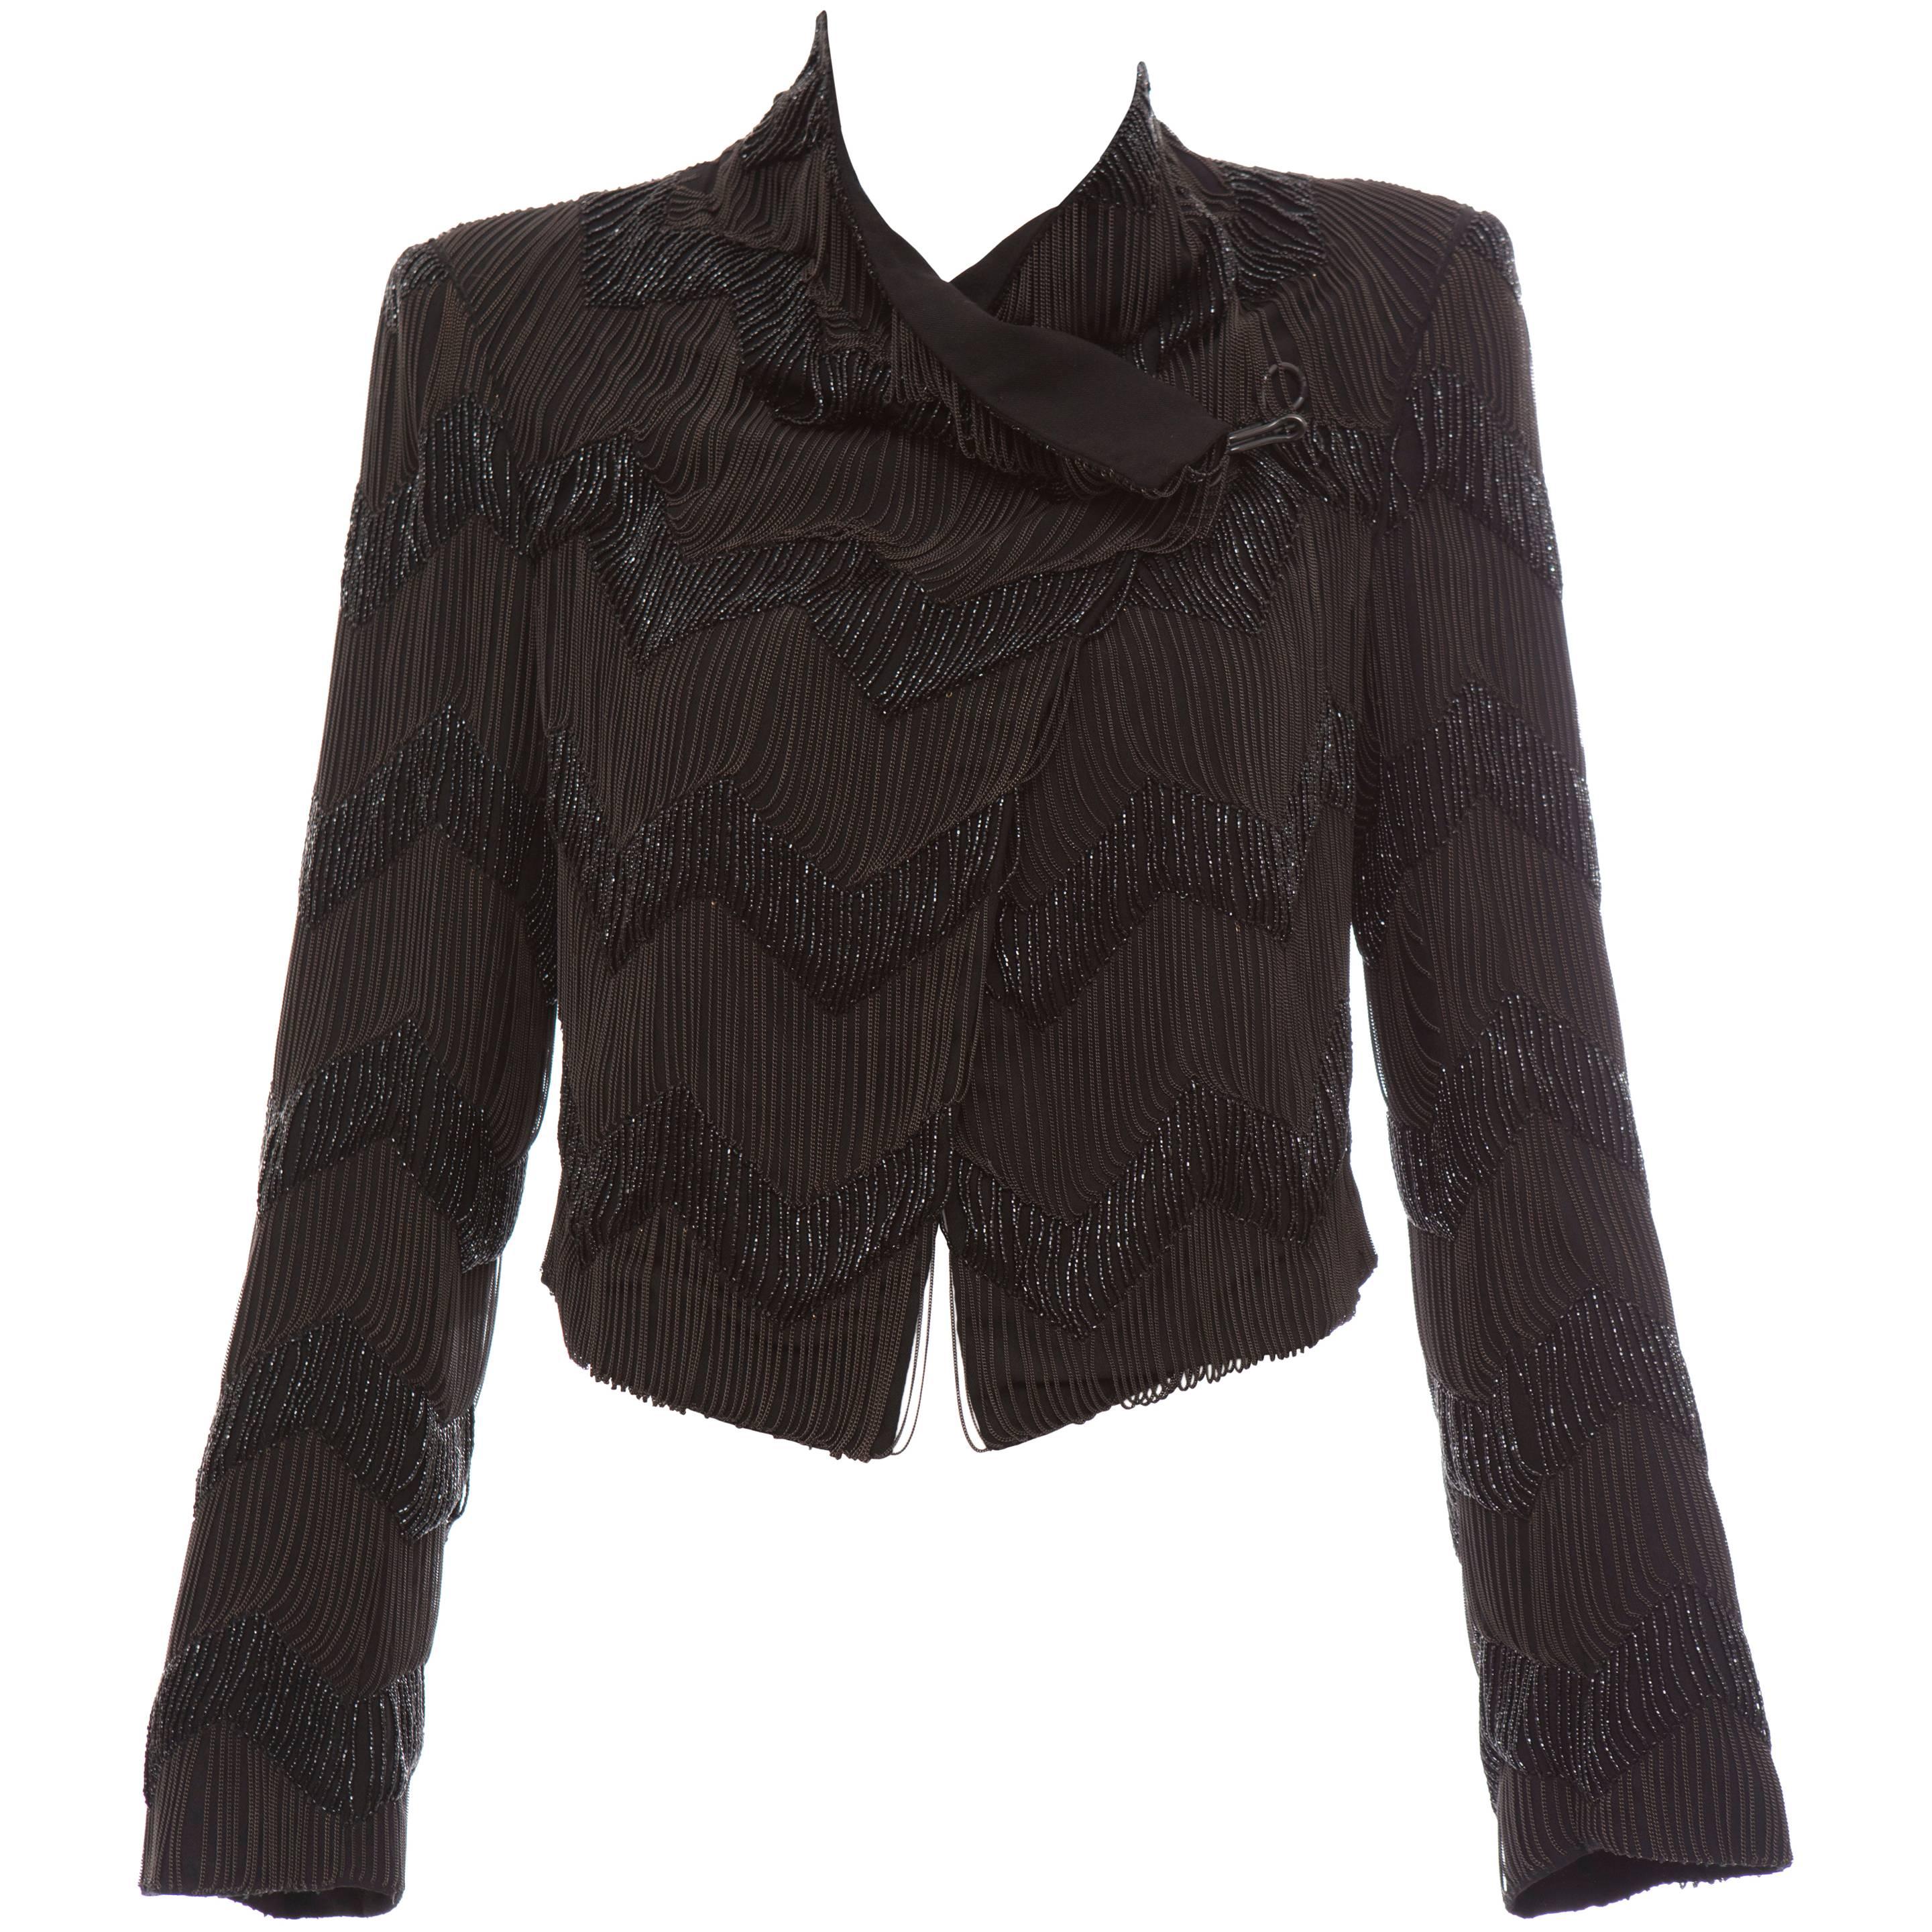 Ann Demeulemeester Runway Black Wool Chain And Beaded Jacket, Fall 2011 For Sale